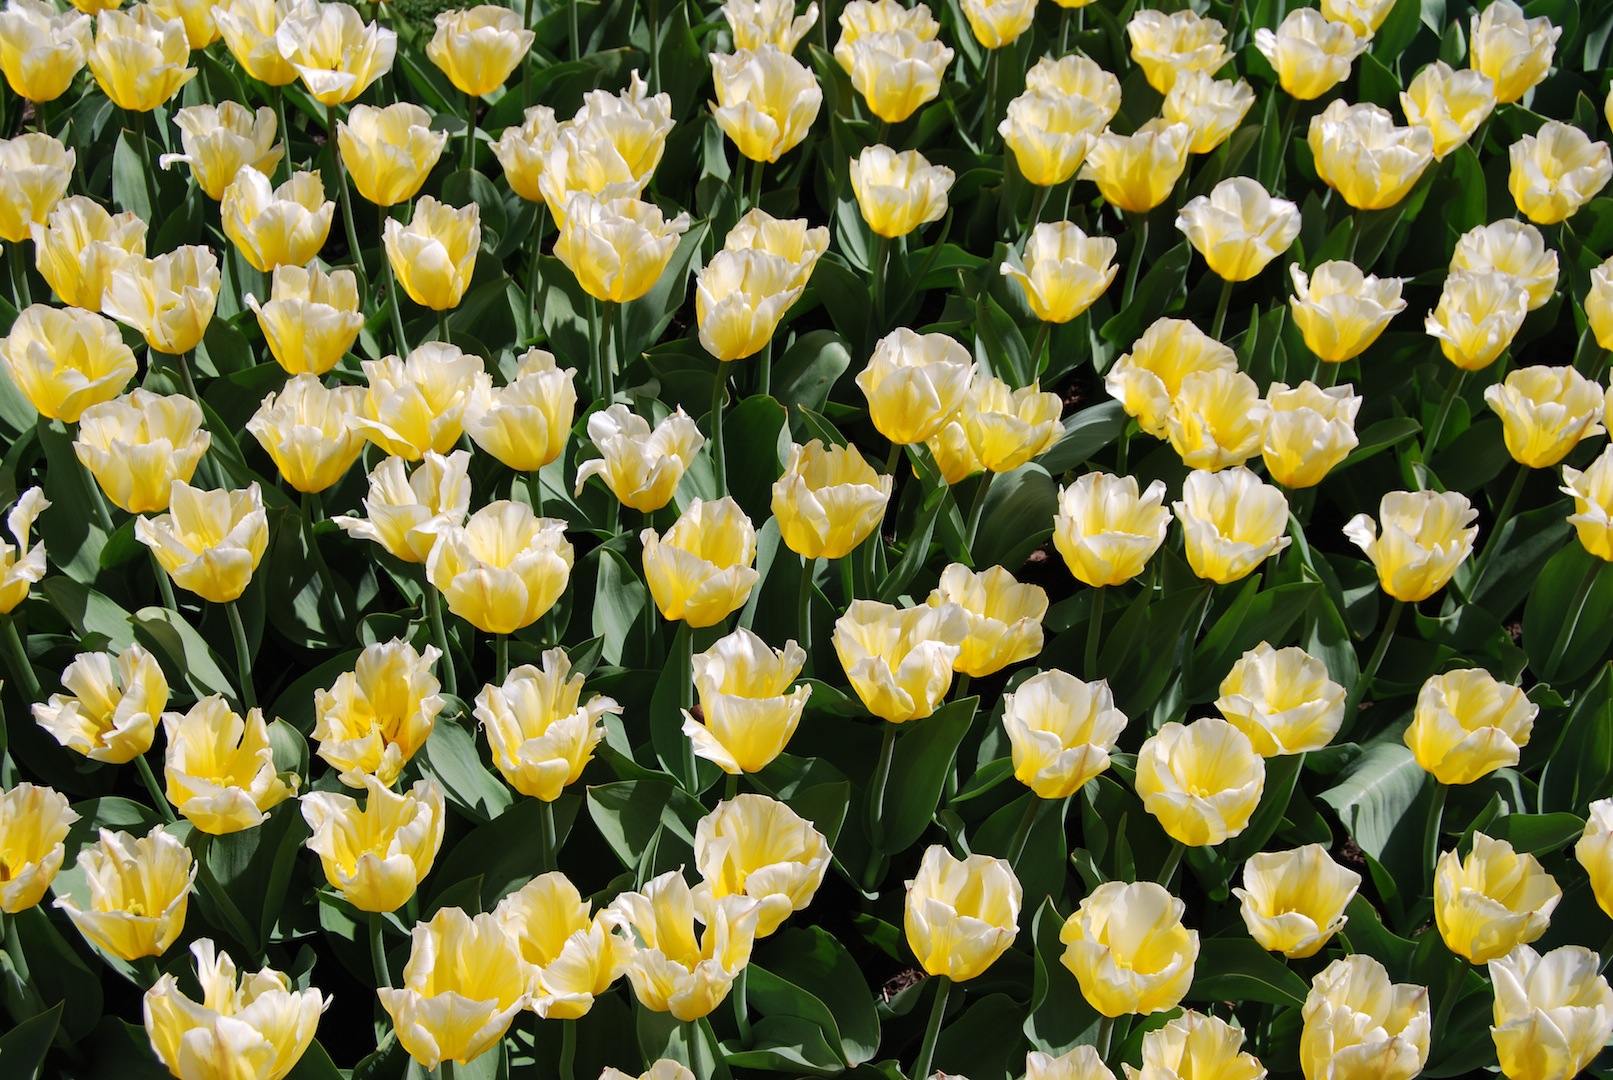 Tulip Frenzy (user submitted)